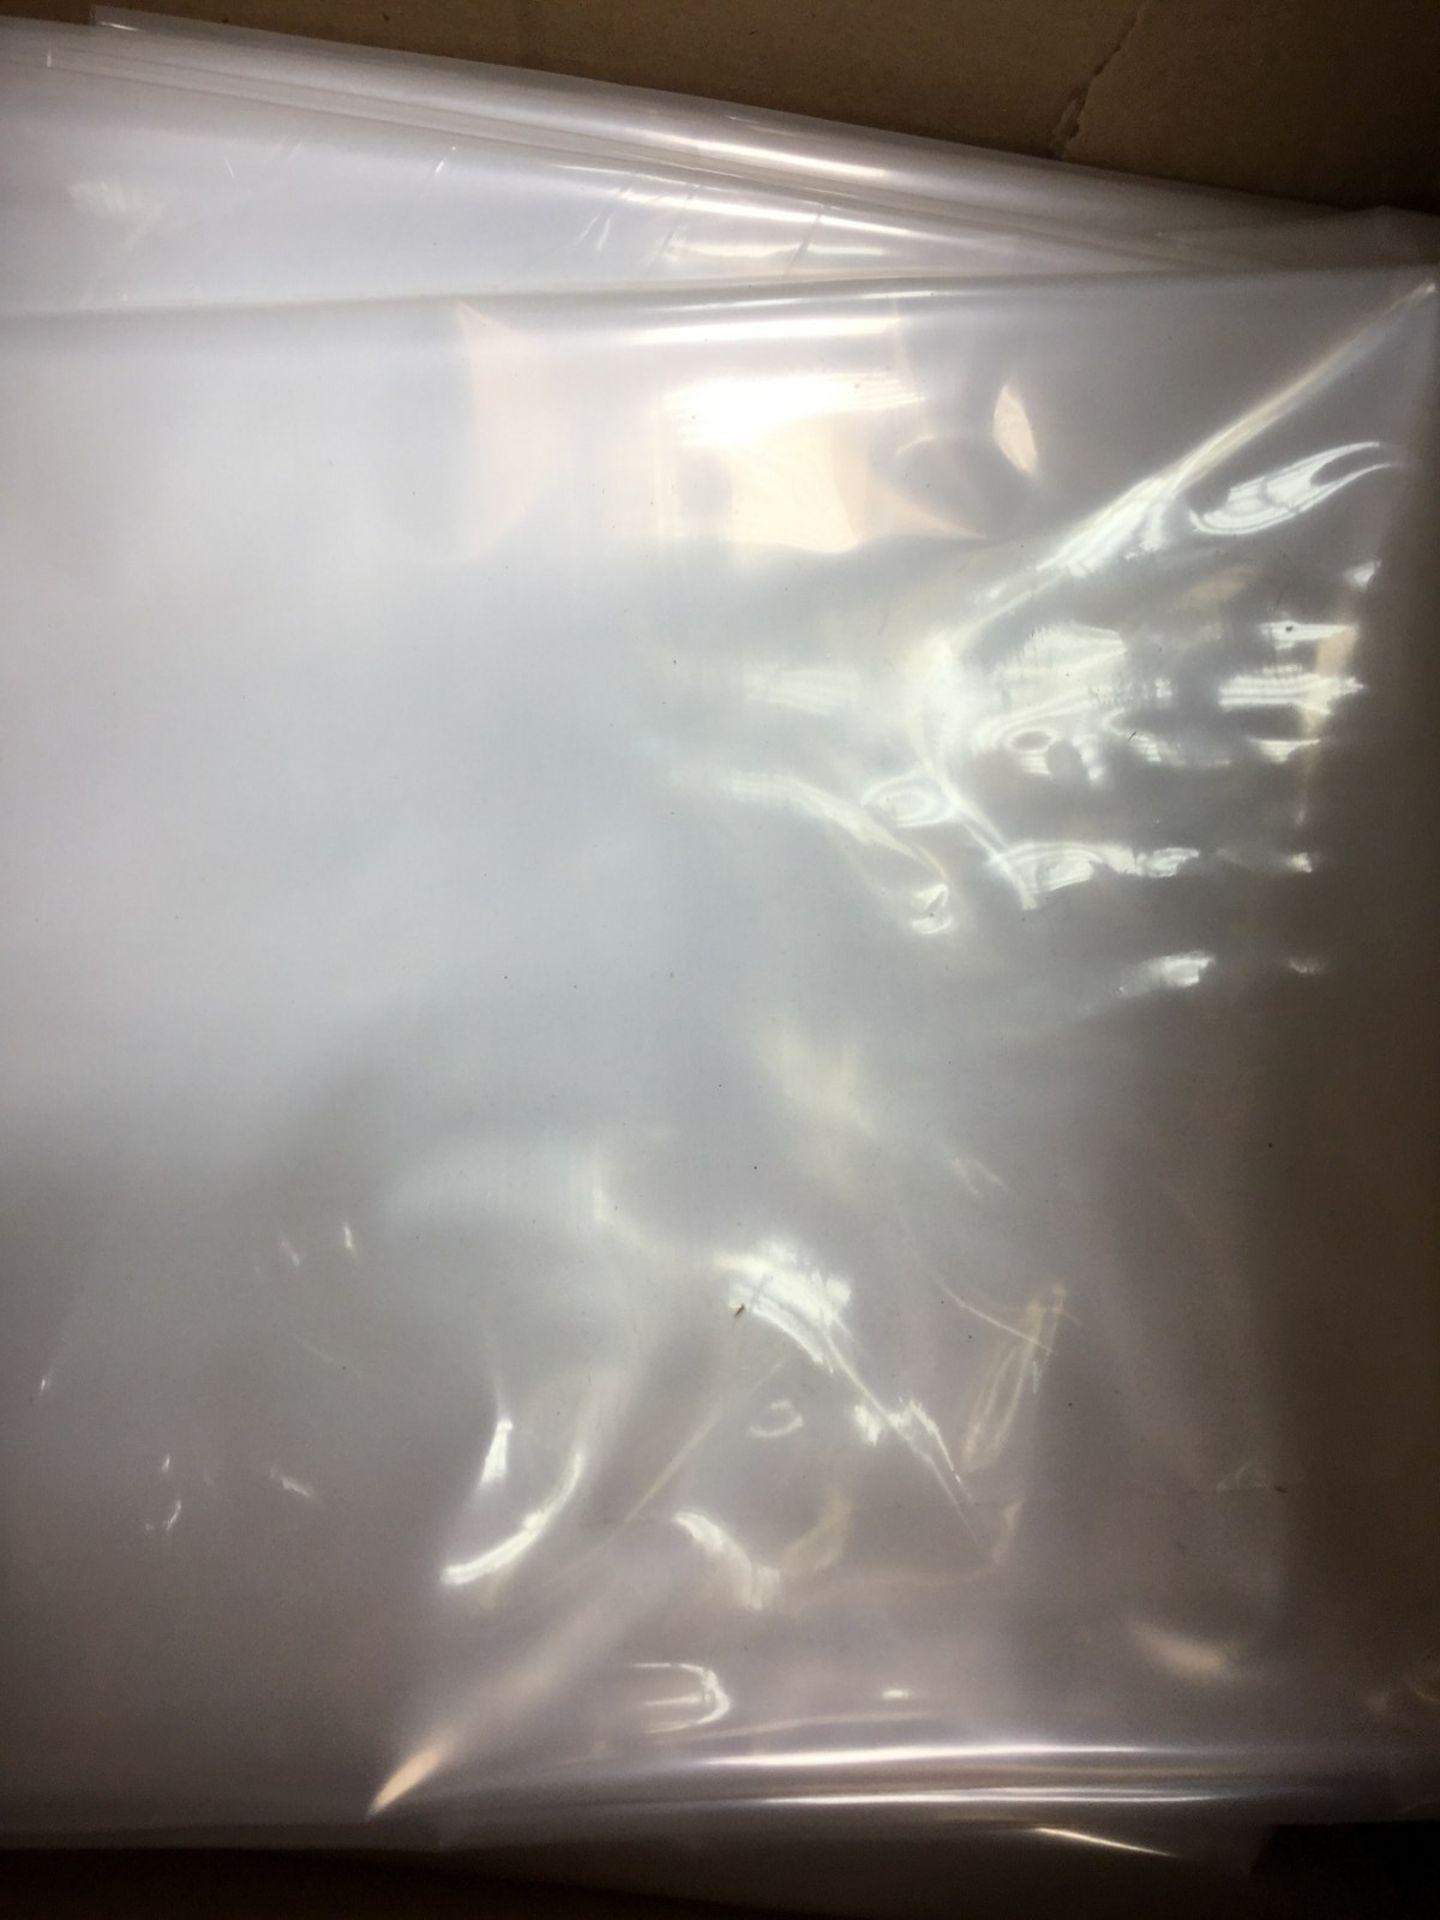 7 X 100PCS - MR JANITORIAL CLEAR INDUSTRIAL GARBAGE BAGS - Image 3 of 3